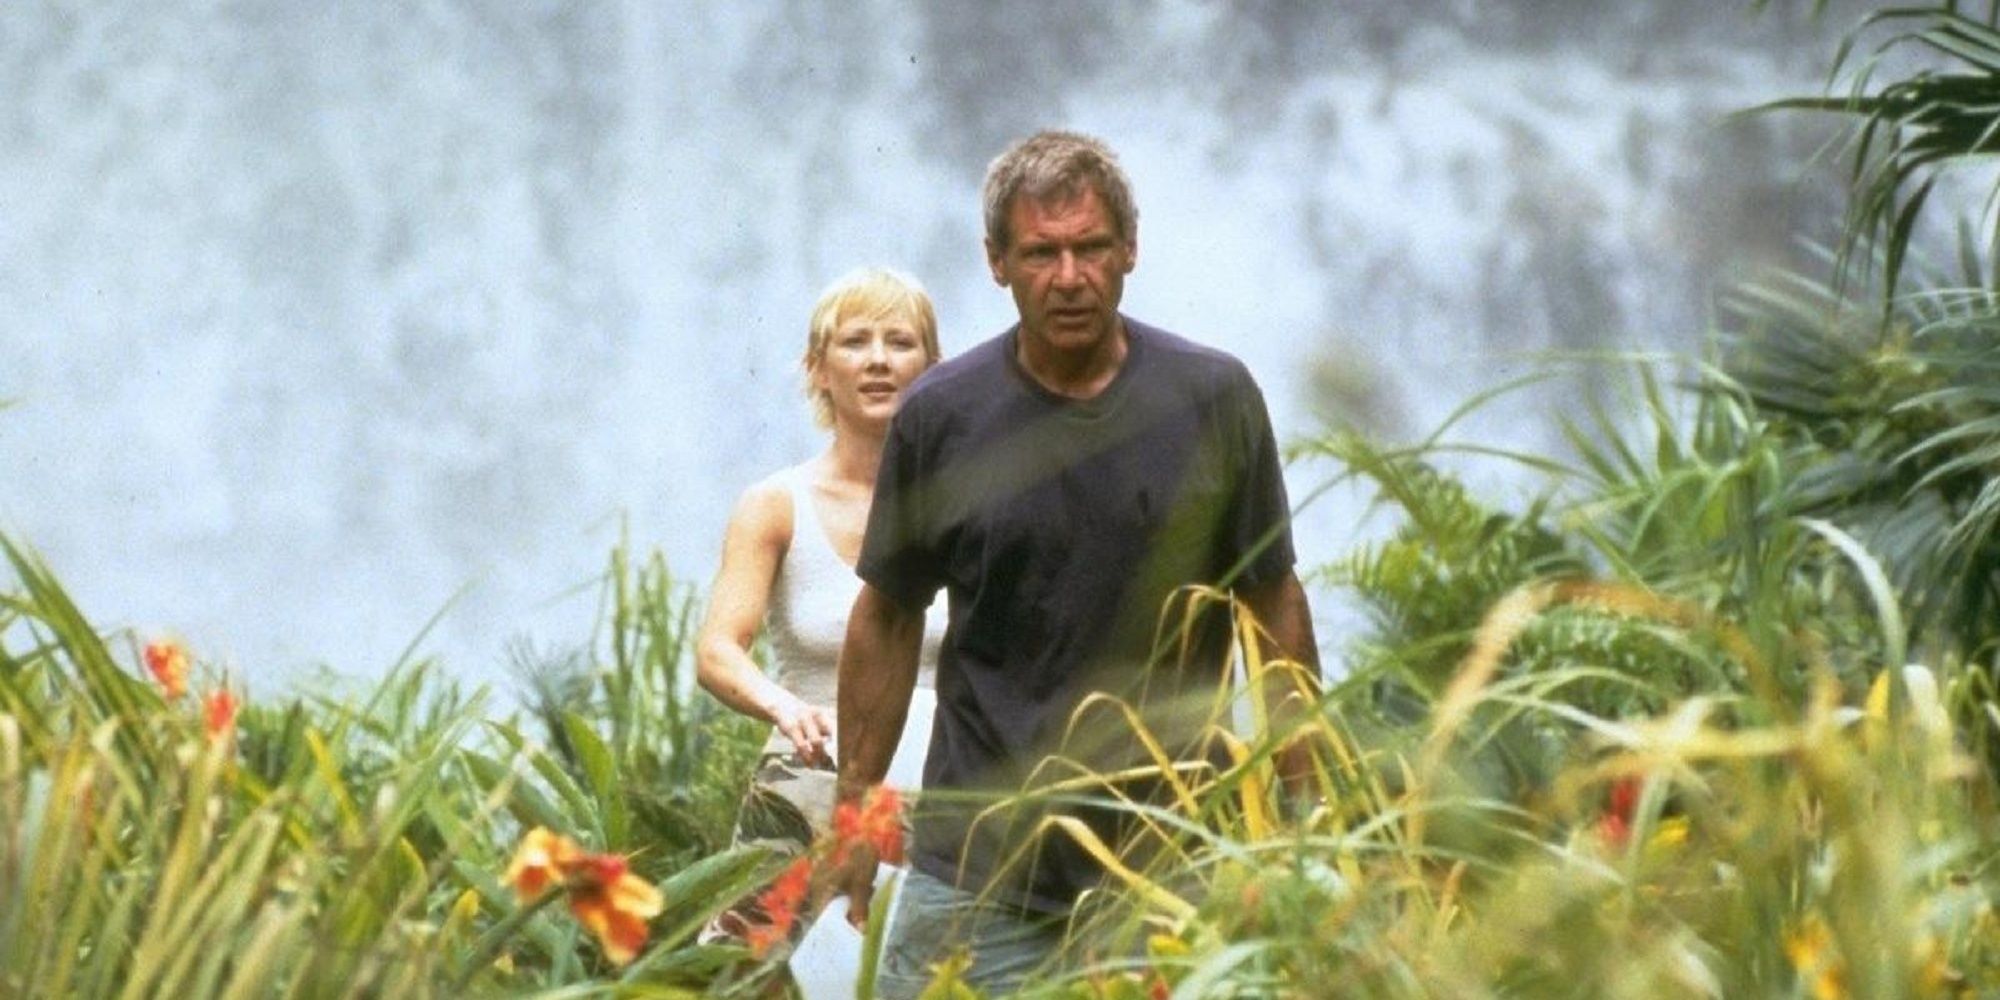 Harrison Ford and Anee Heche in a tropical island grass field in Six Days, Seven Nights.